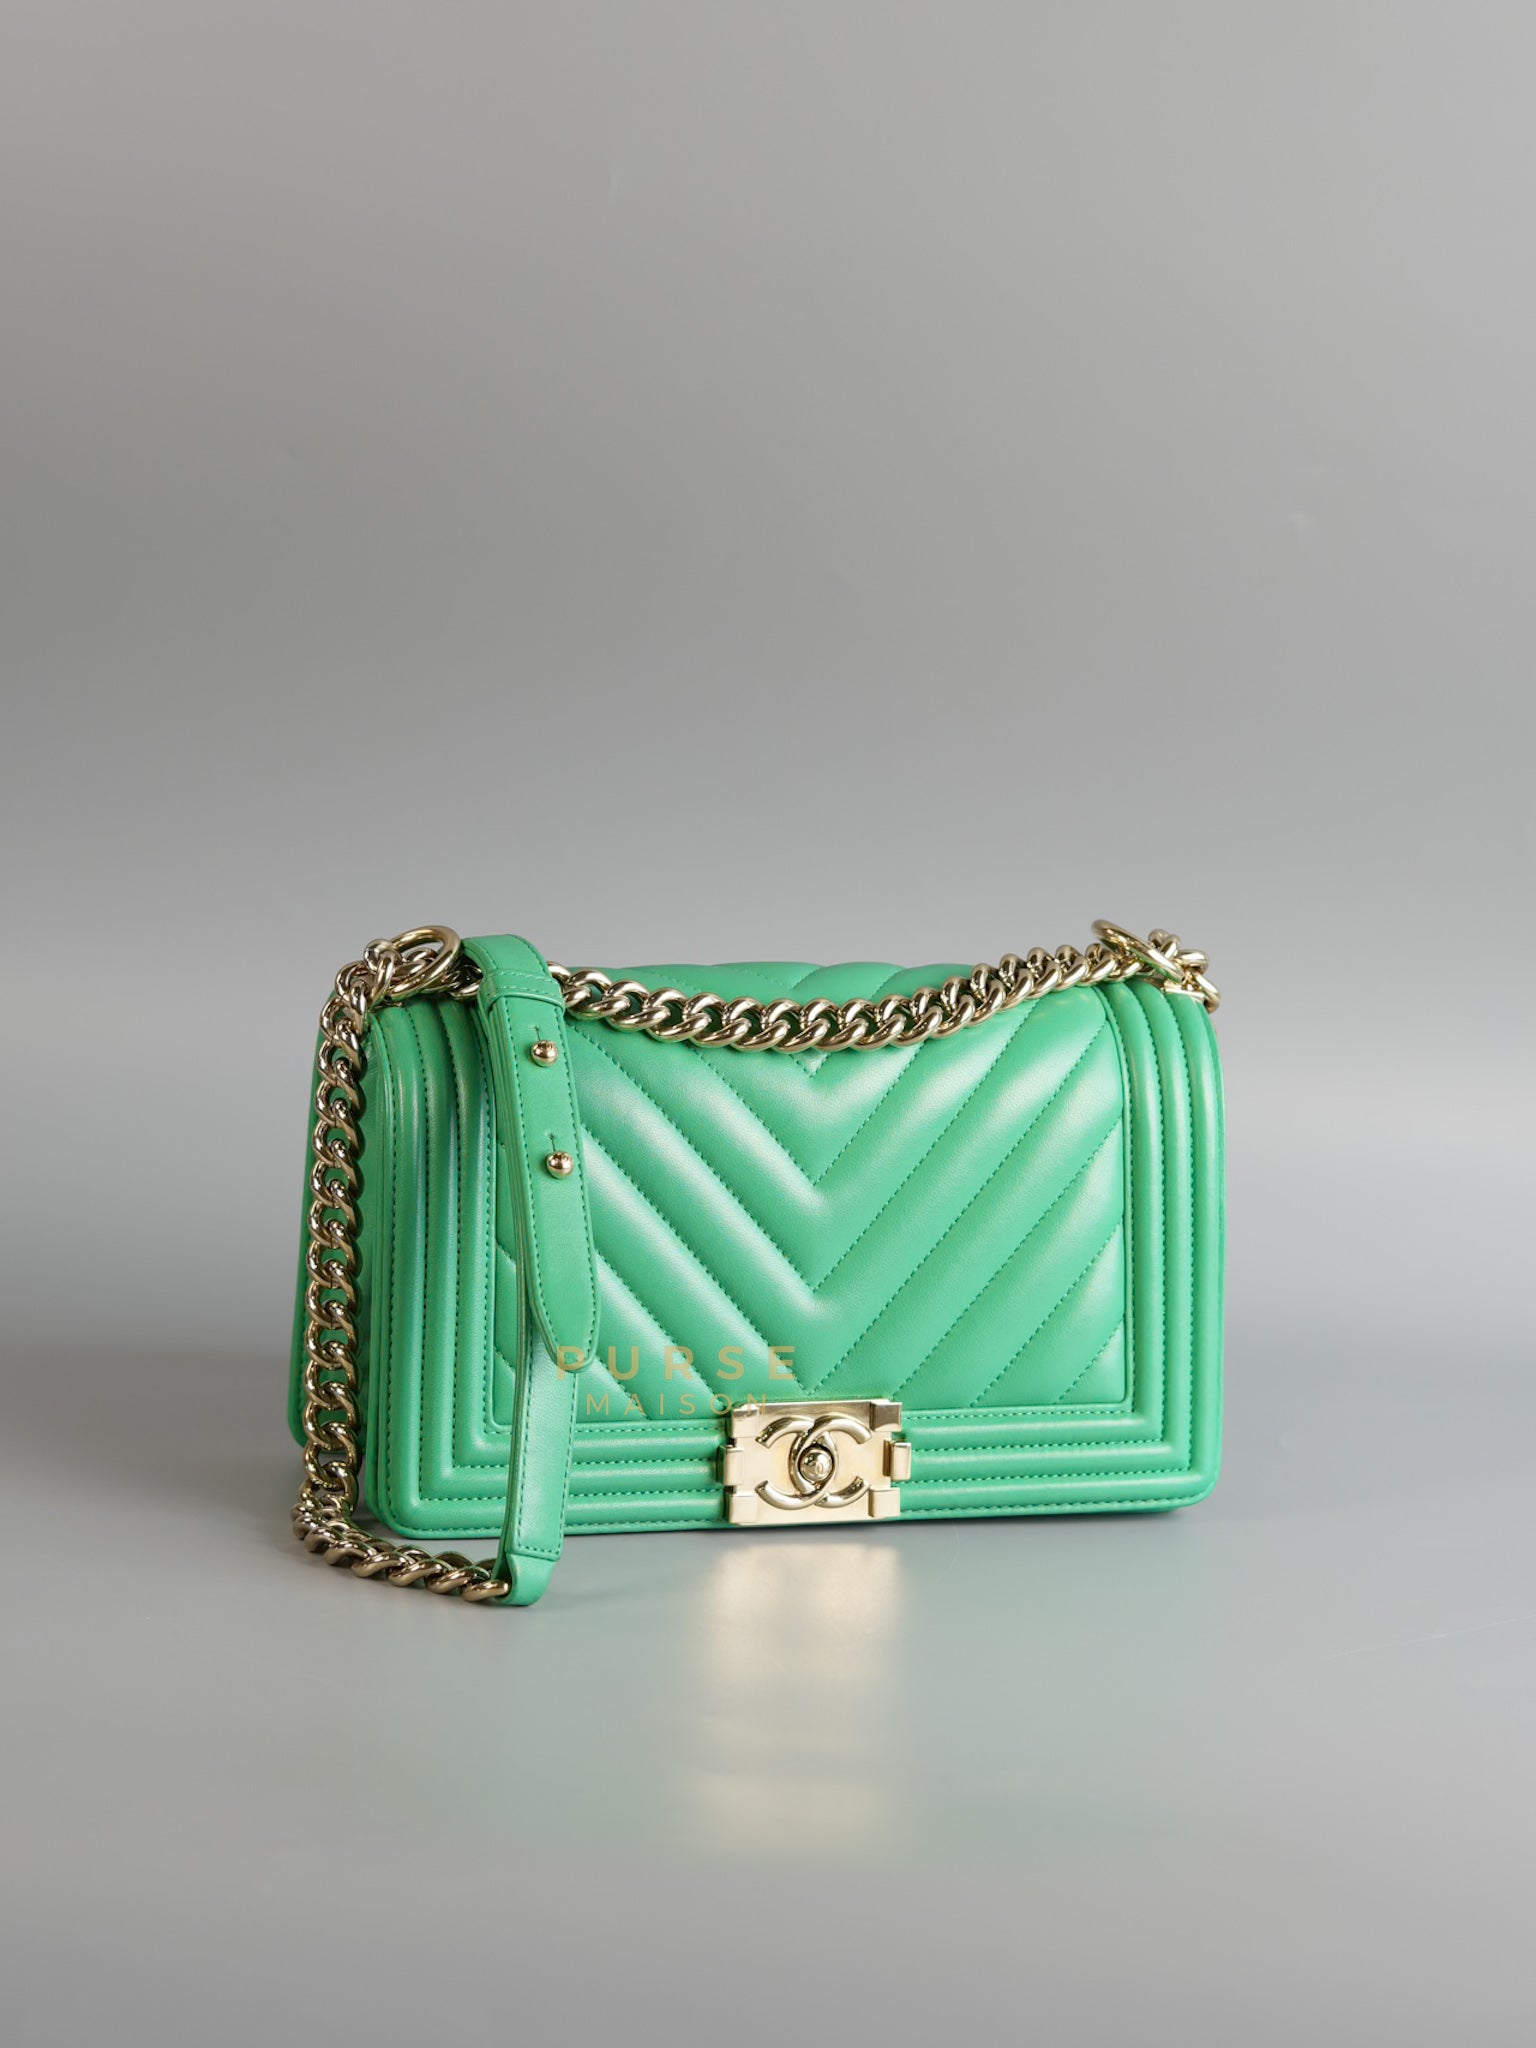 Boy Old Medium in Mint Green Chevron Lambskin Leather and Light Gold Hardware Series 23 | Purse Maison Luxury Bags Shop